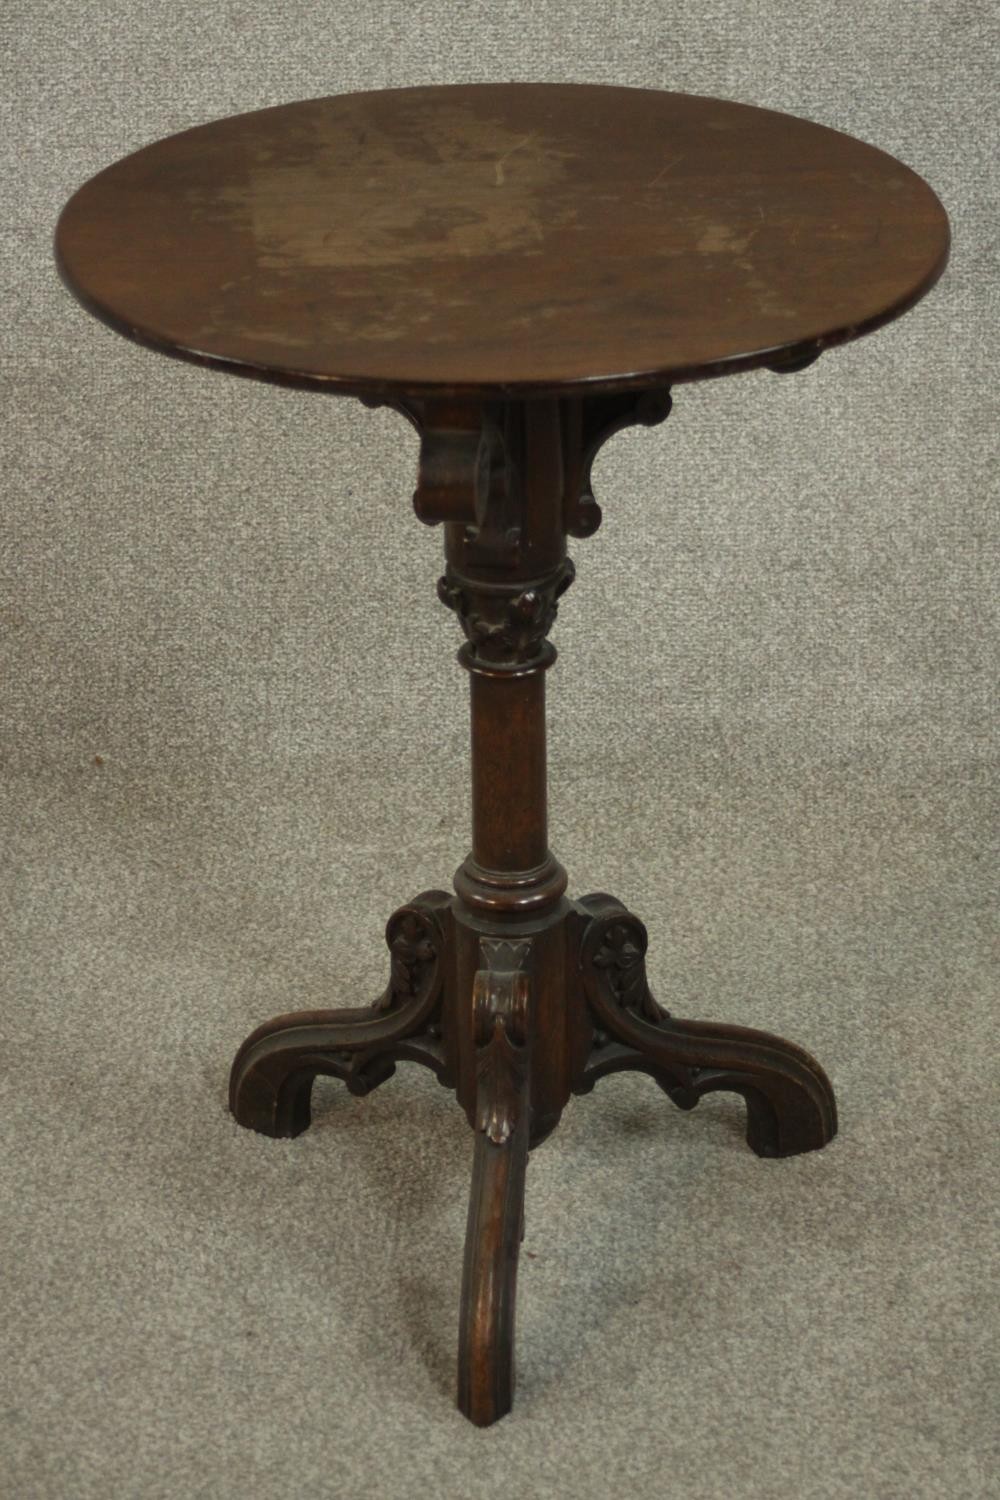 A Victorian ecclesiastical mahogany occasional table, with a circular top supported by carved